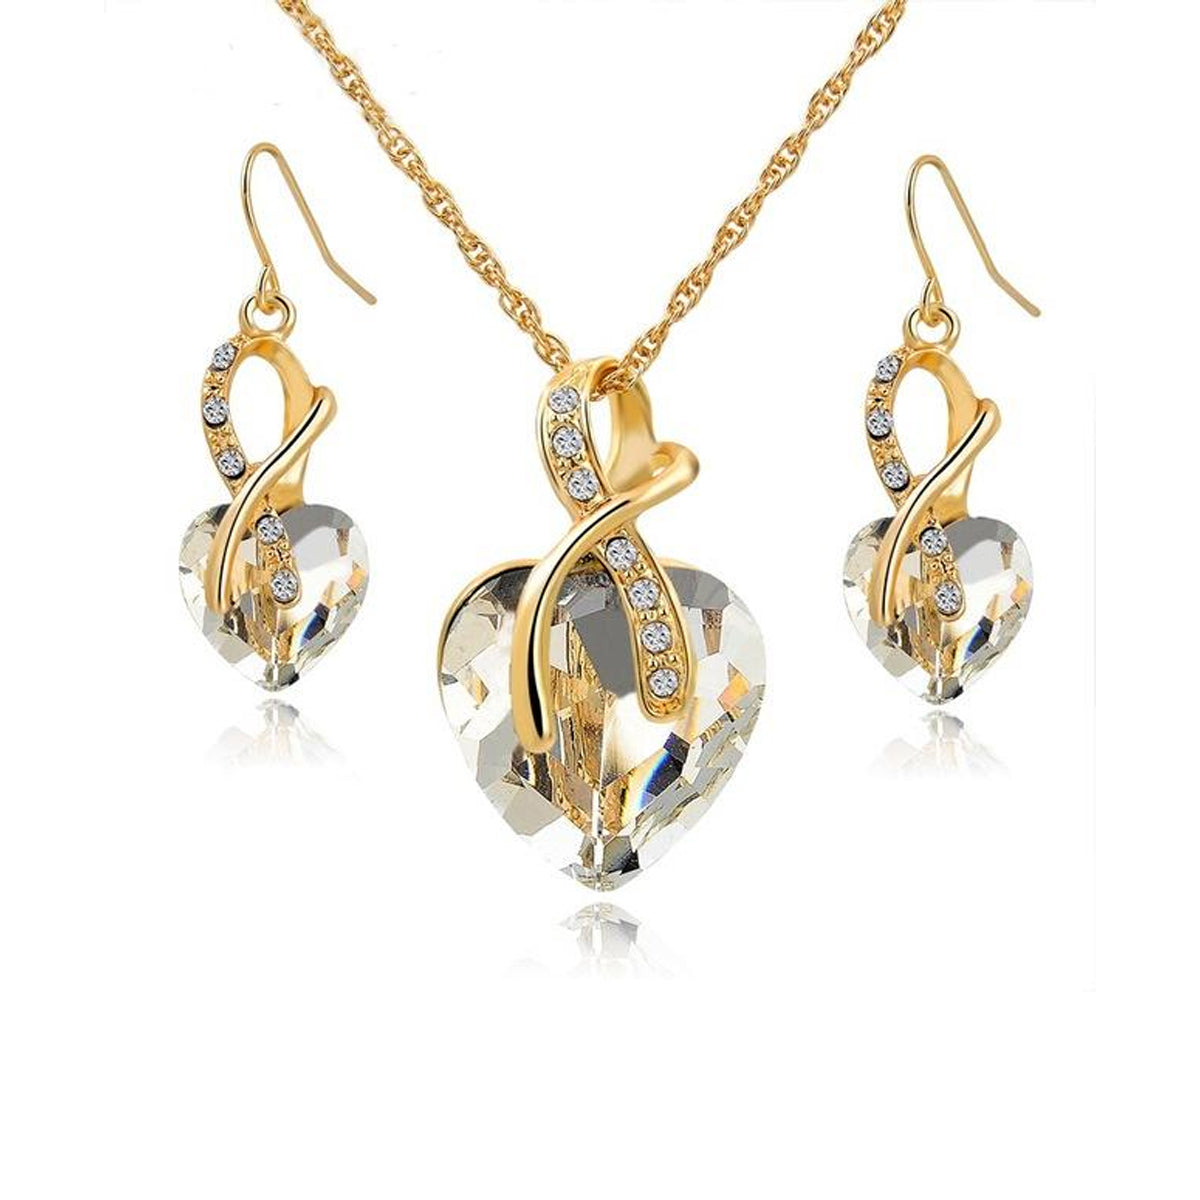 2 Sets of Wishful Heart Necklace and Earring Sets